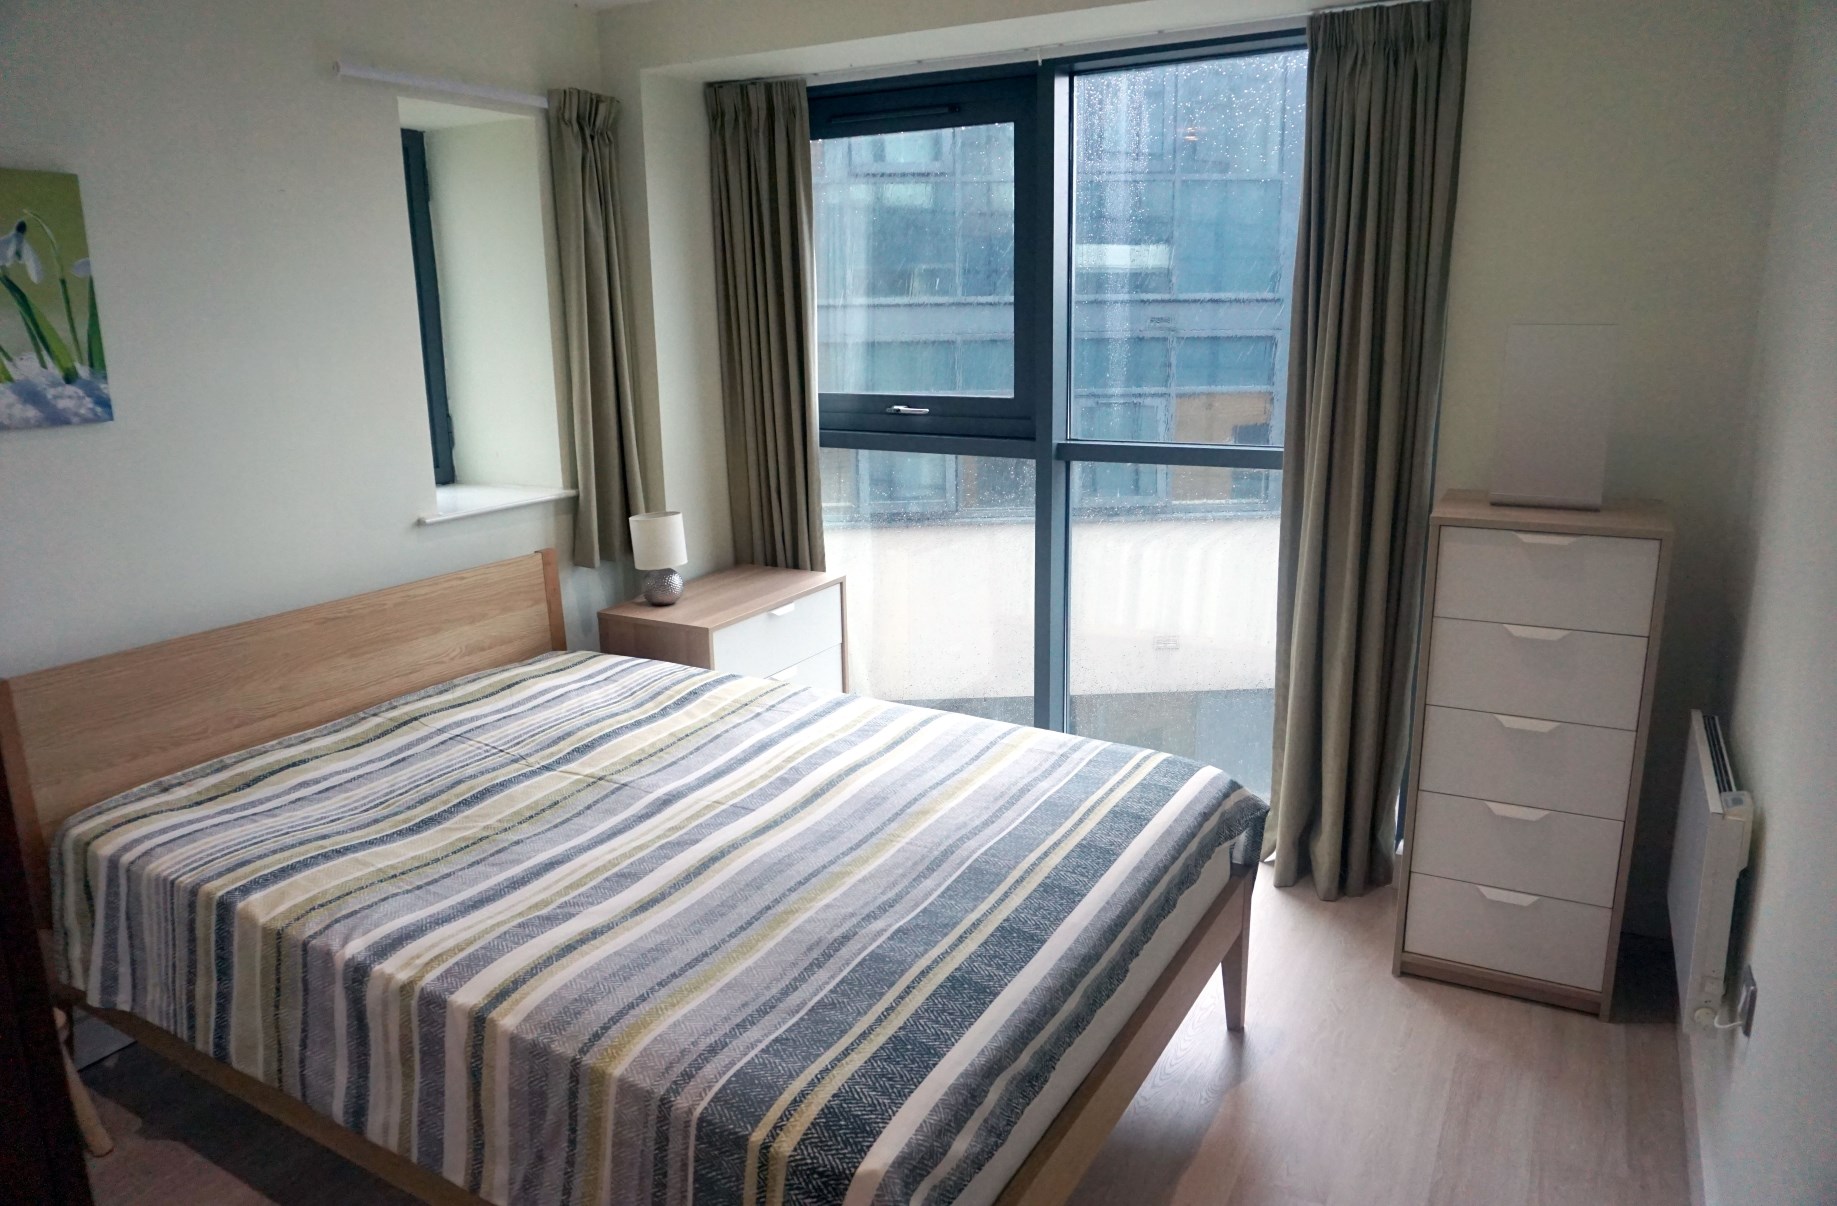 West One Sheffield: apartment 1 bedroom